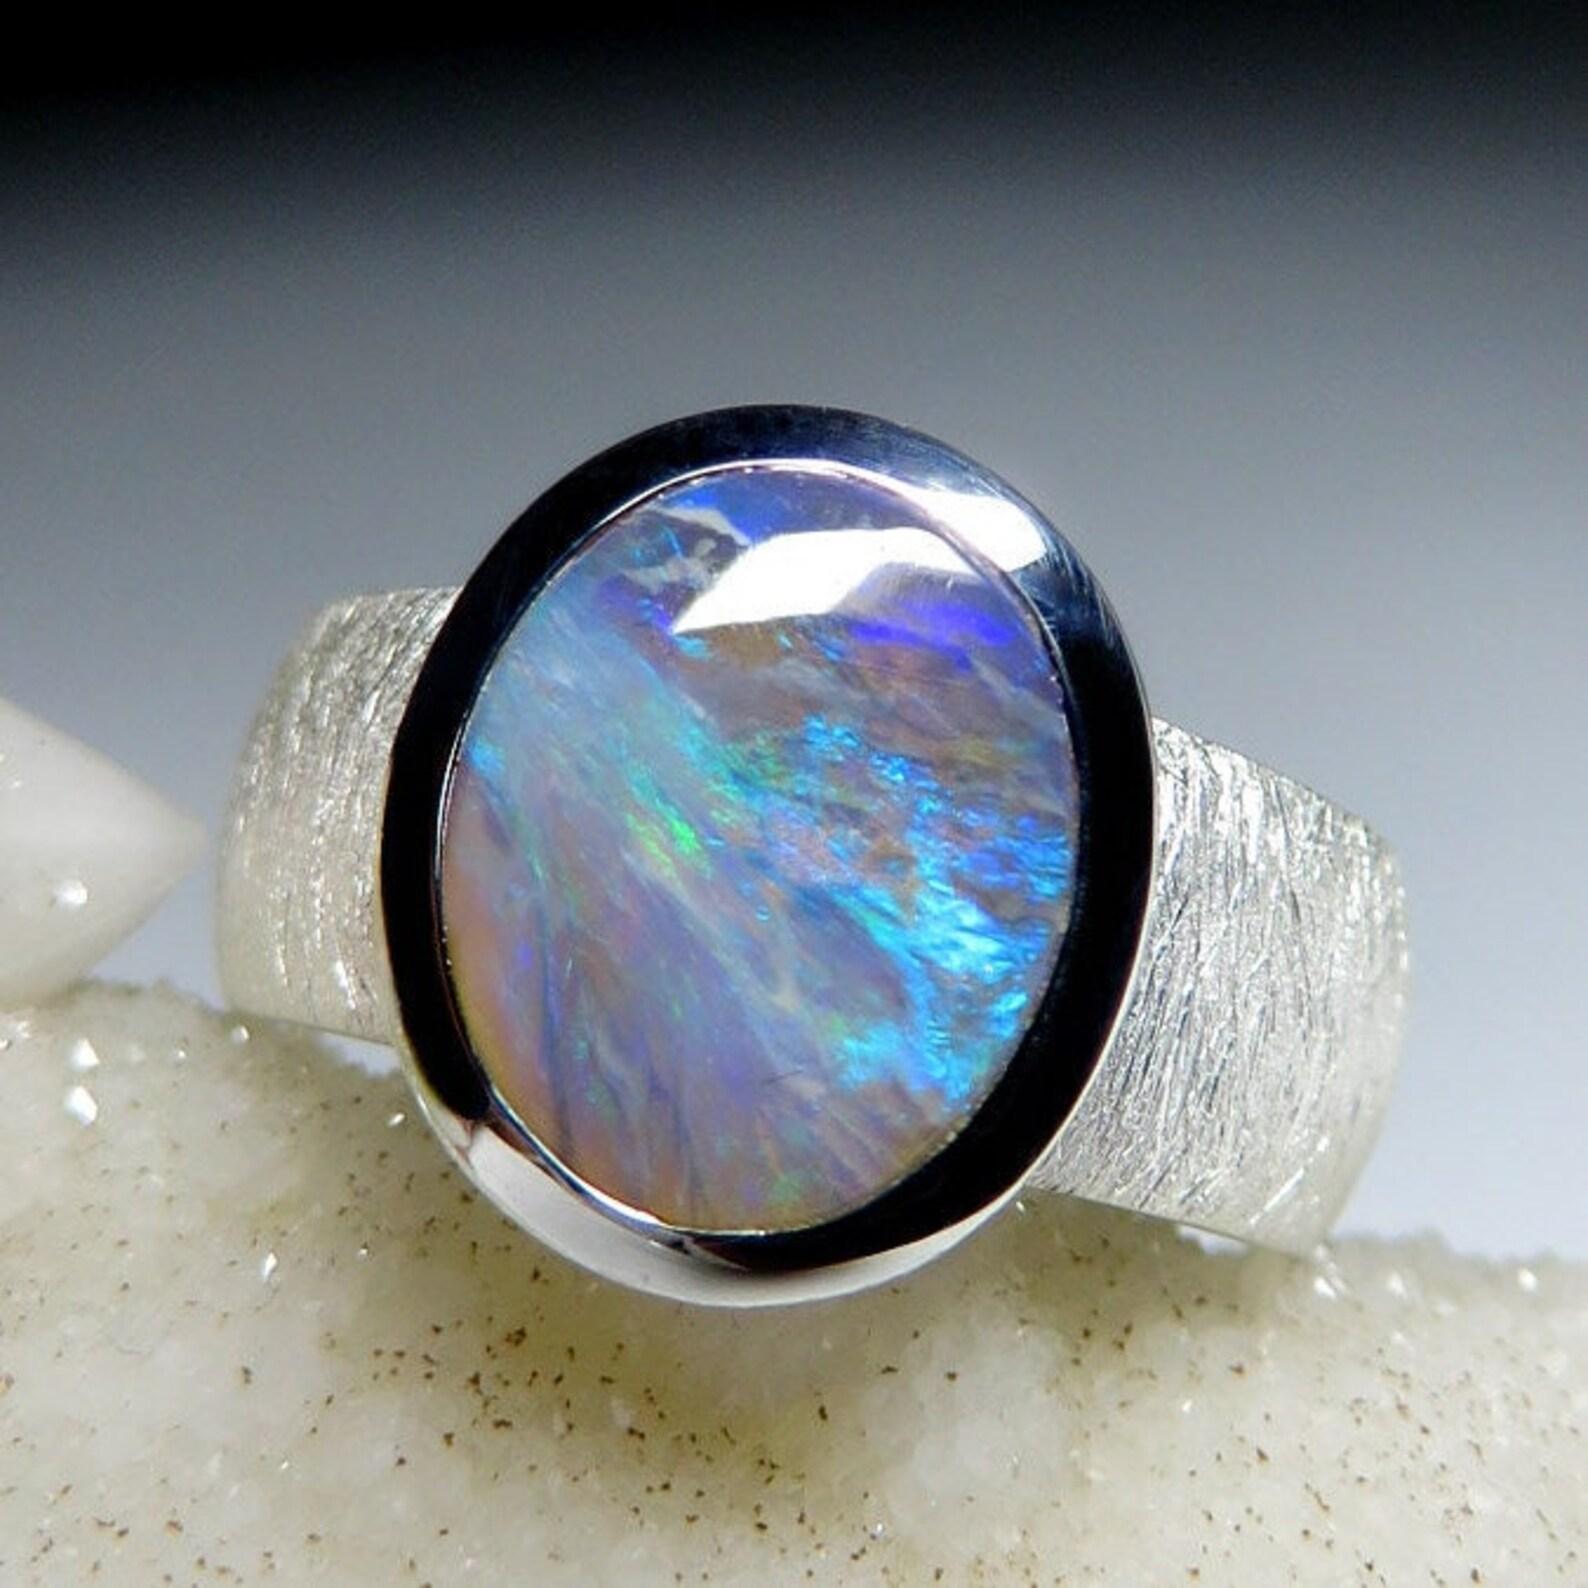 Matte finish silver ring with natural Dark Opal
opal origin - Australia 
stone measurements - 0.079 х 0.31 х 0.39 in / 2 х 8 х 10 mm 
weight of the stone - 1.9 carats
tone of opal № 6
ring weight - 7.26 grams 
ring size - 6 US